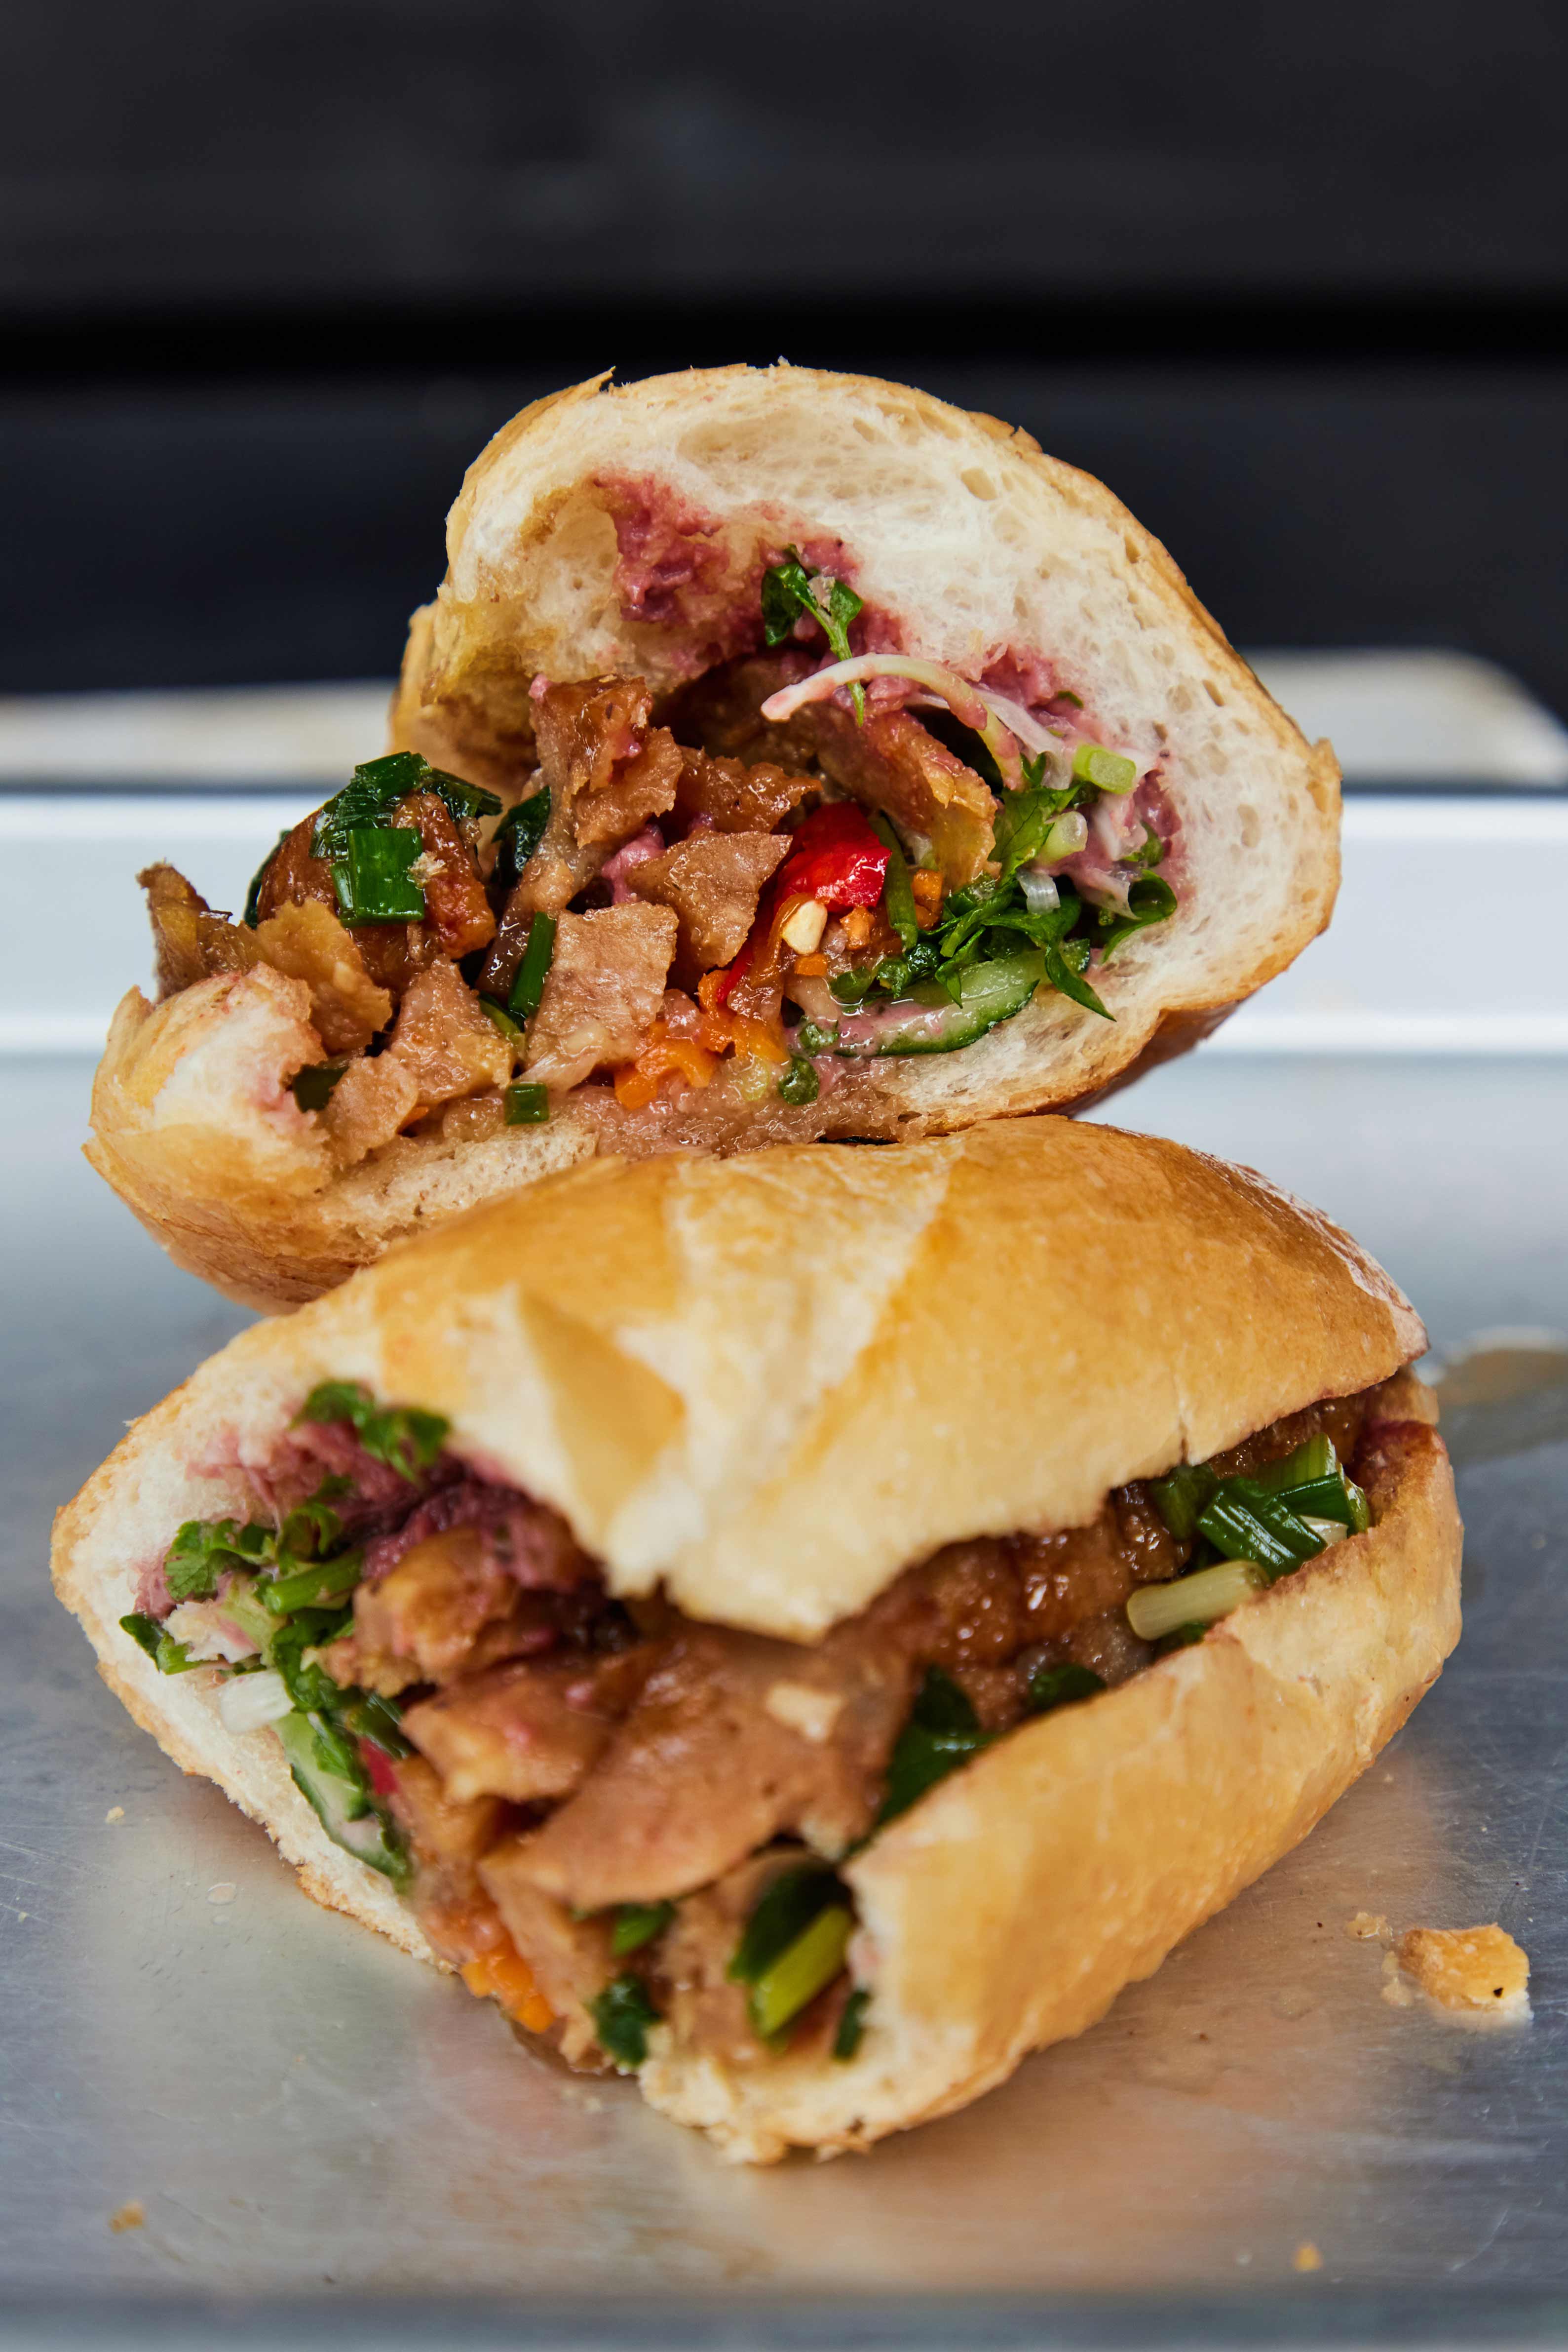 The Roasted Pork (Banh Mi Thit Nuong), $6.50 